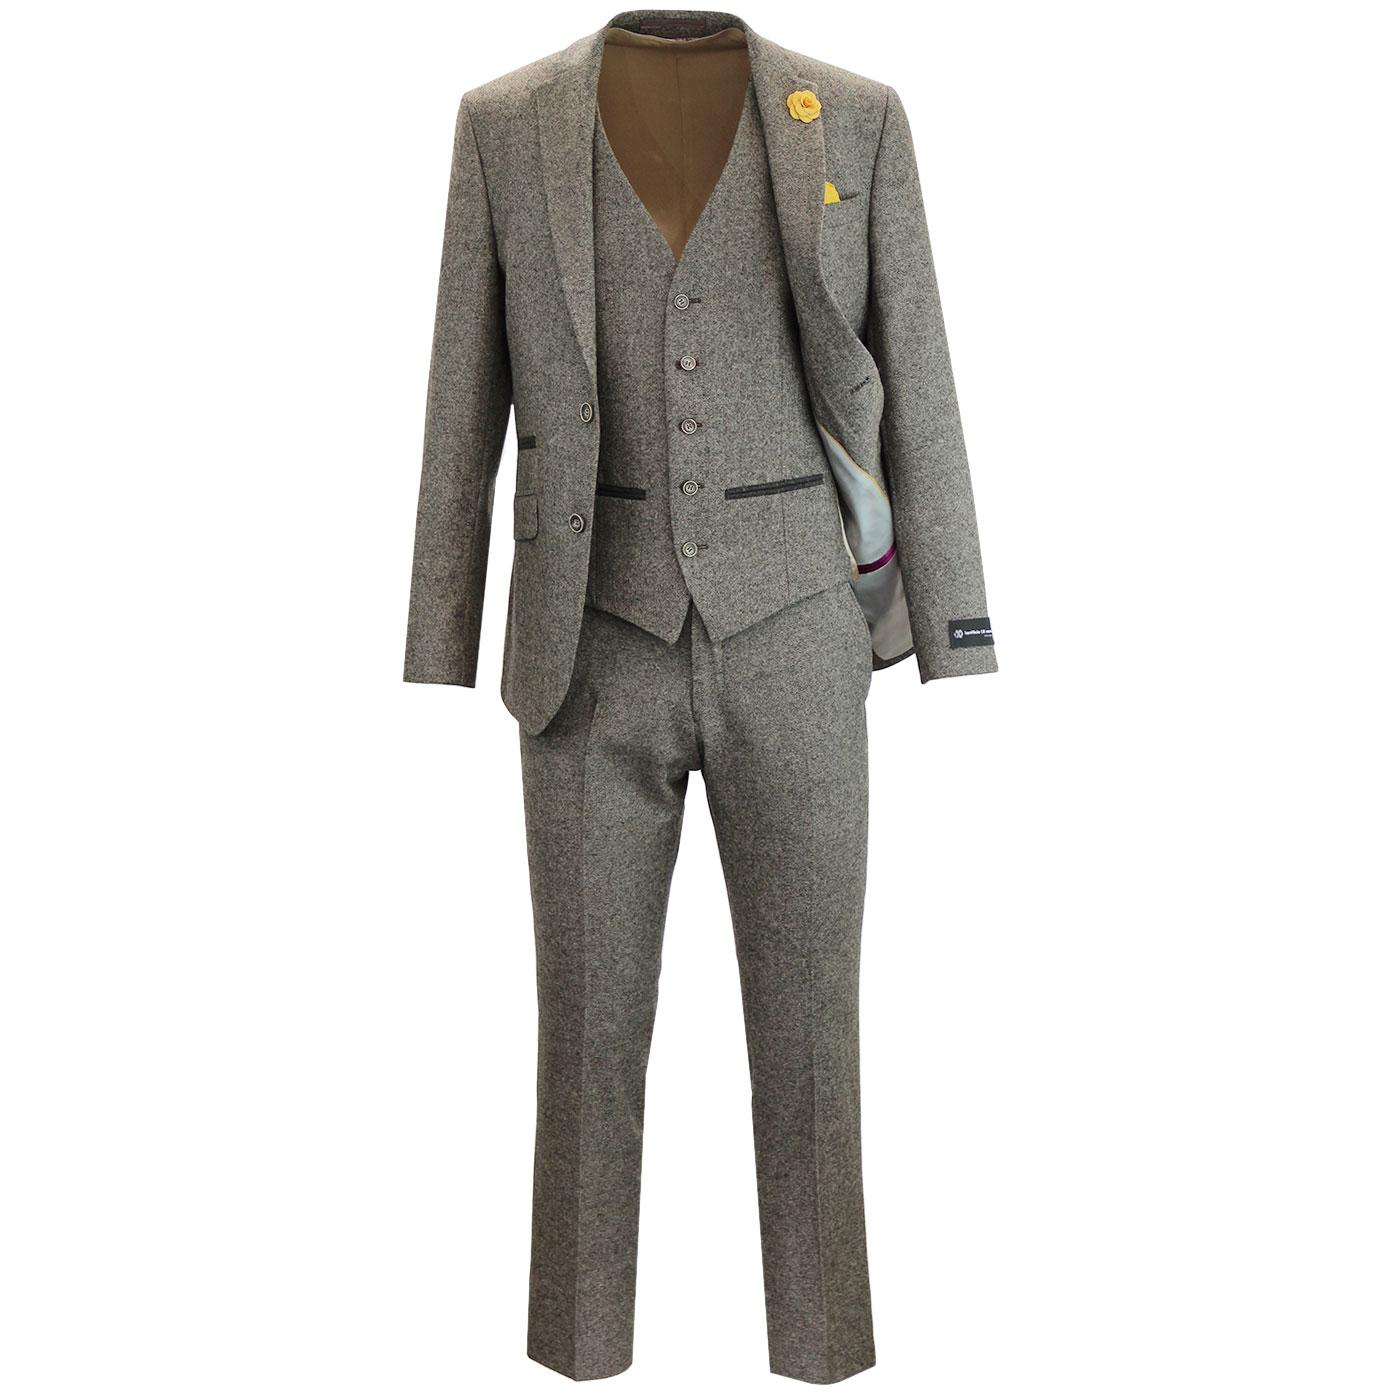 Mens Retro 60s Mod 3 Piece Donegal Suit in Taupe 1960s Mens Suits